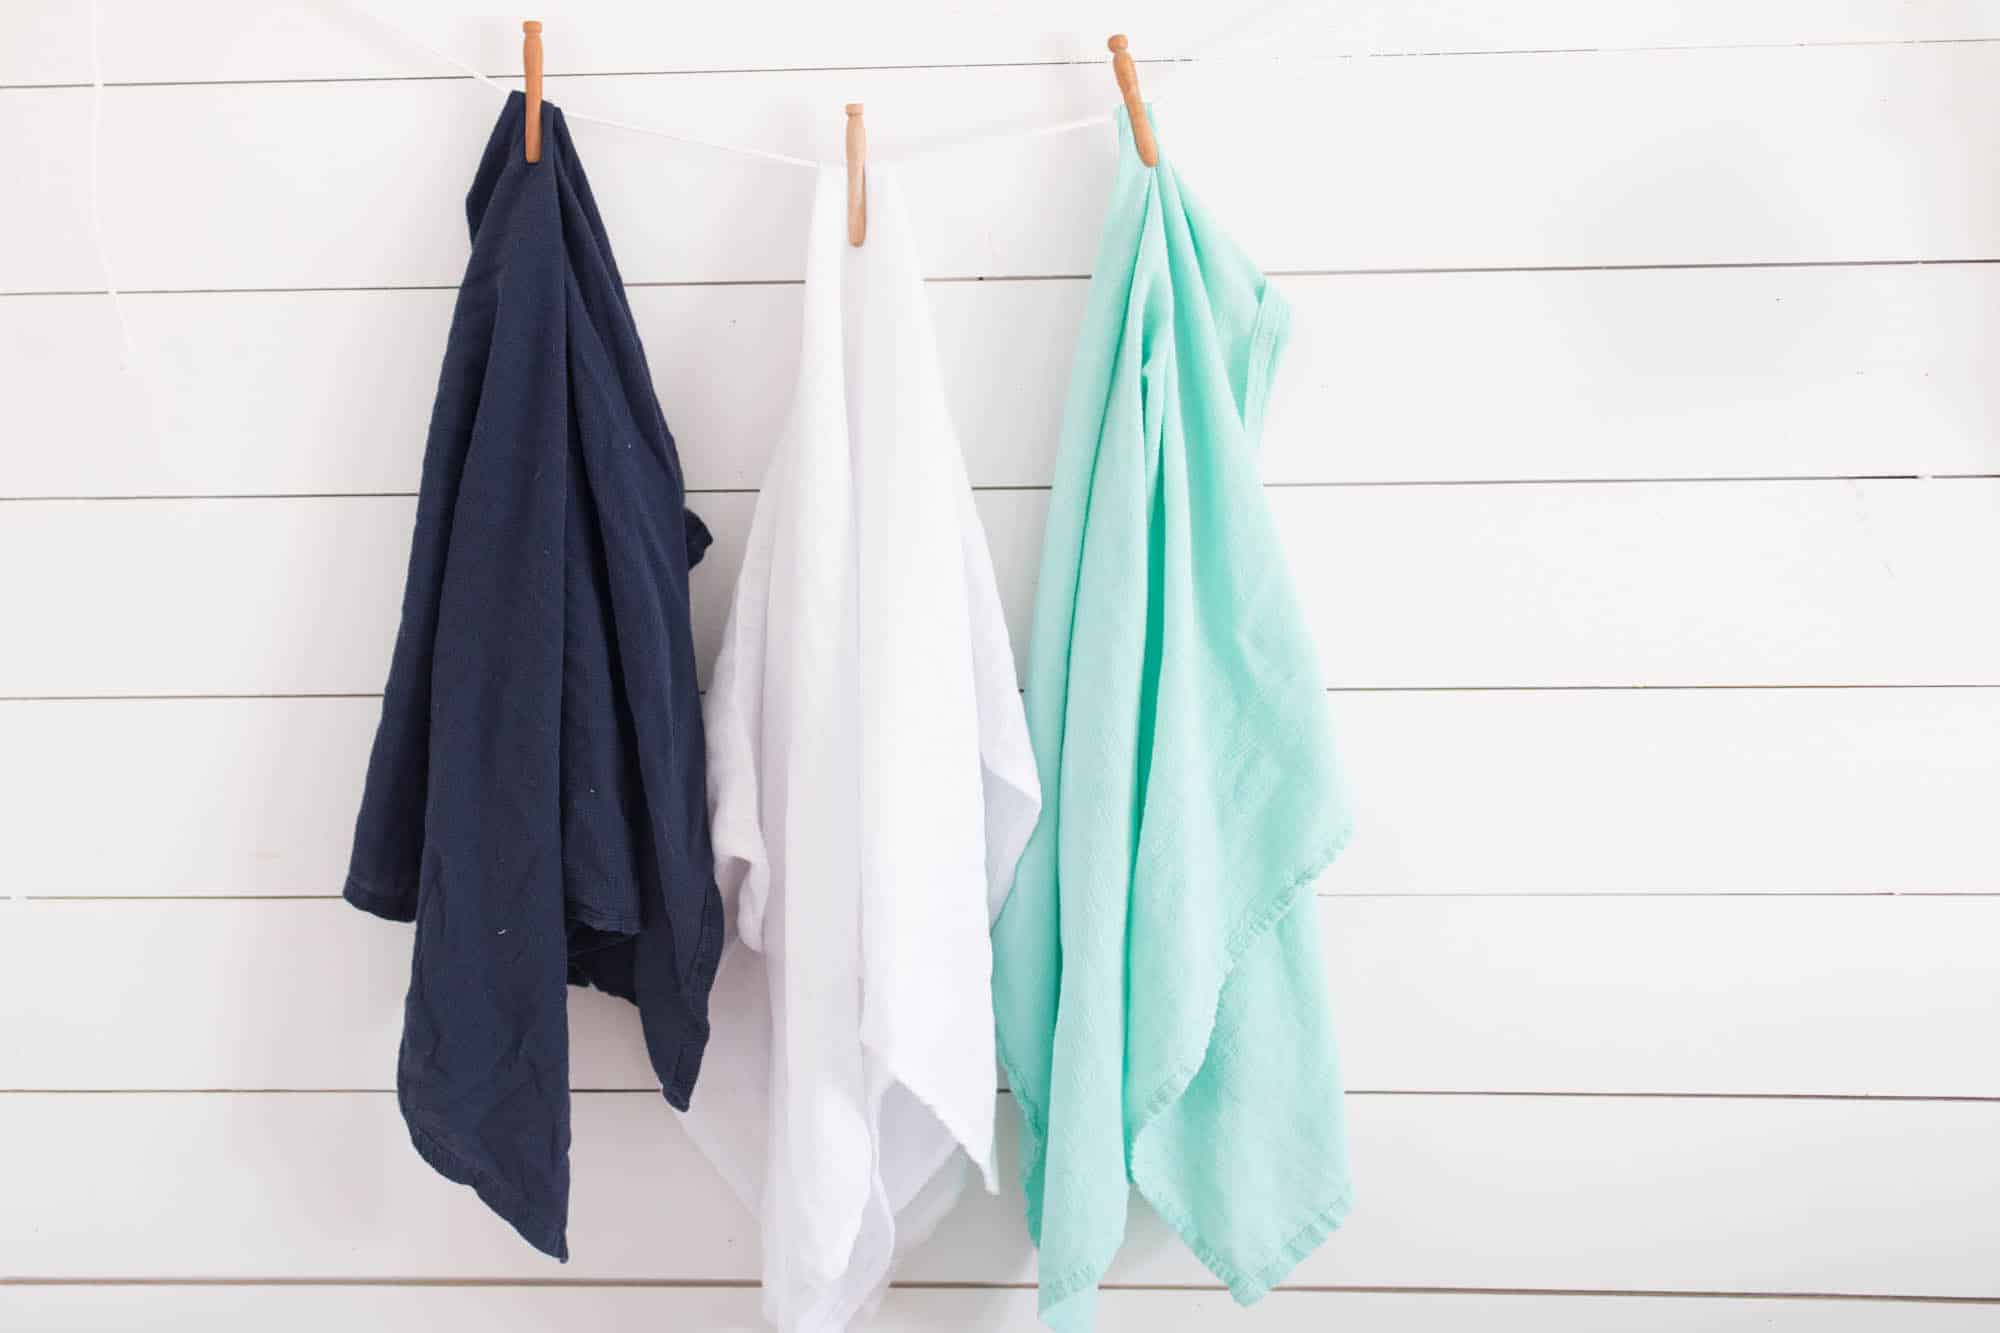 https://www.farmhouseonboone.com/wp-content/uploads/2018/02/How-to-Make-Muslin-Swaddle-Blankets-11.jpg